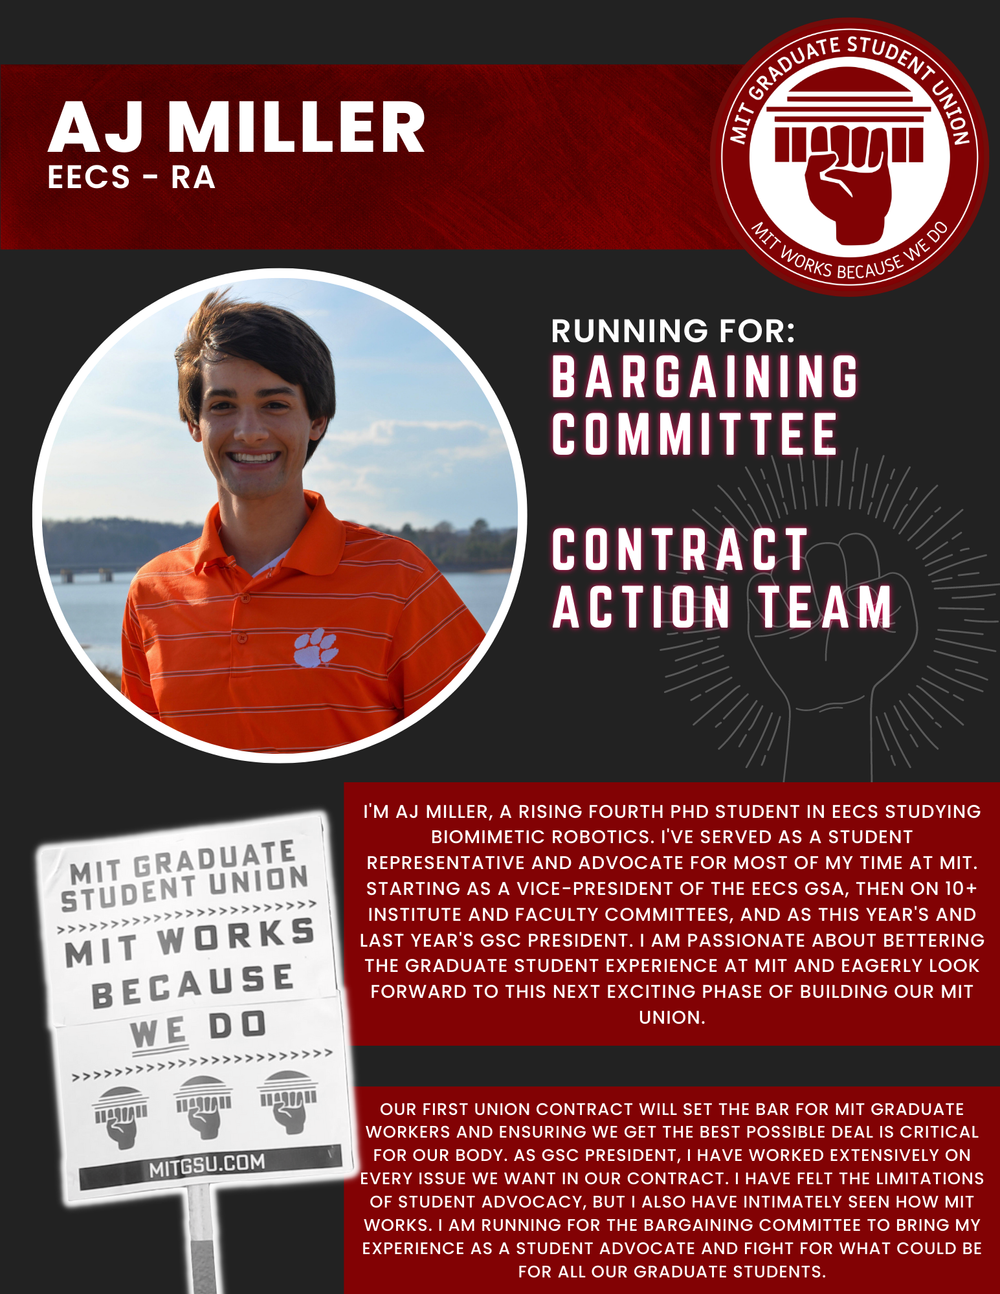  AJ MILLER EECS - RA   RUNNING FOR: Bargaining Committee  Contract Action Team  I'M AJ MILLER, A RISING FOURTH PHD STUDENT IN EECS STUDYING BIOMIMETIC ROBOTICS. I'VE SERVED AS A STUDENT REPRESENTATIVE AND ADVOCATE FOR MOST OF MY TIME AT MIT.  STARTIN